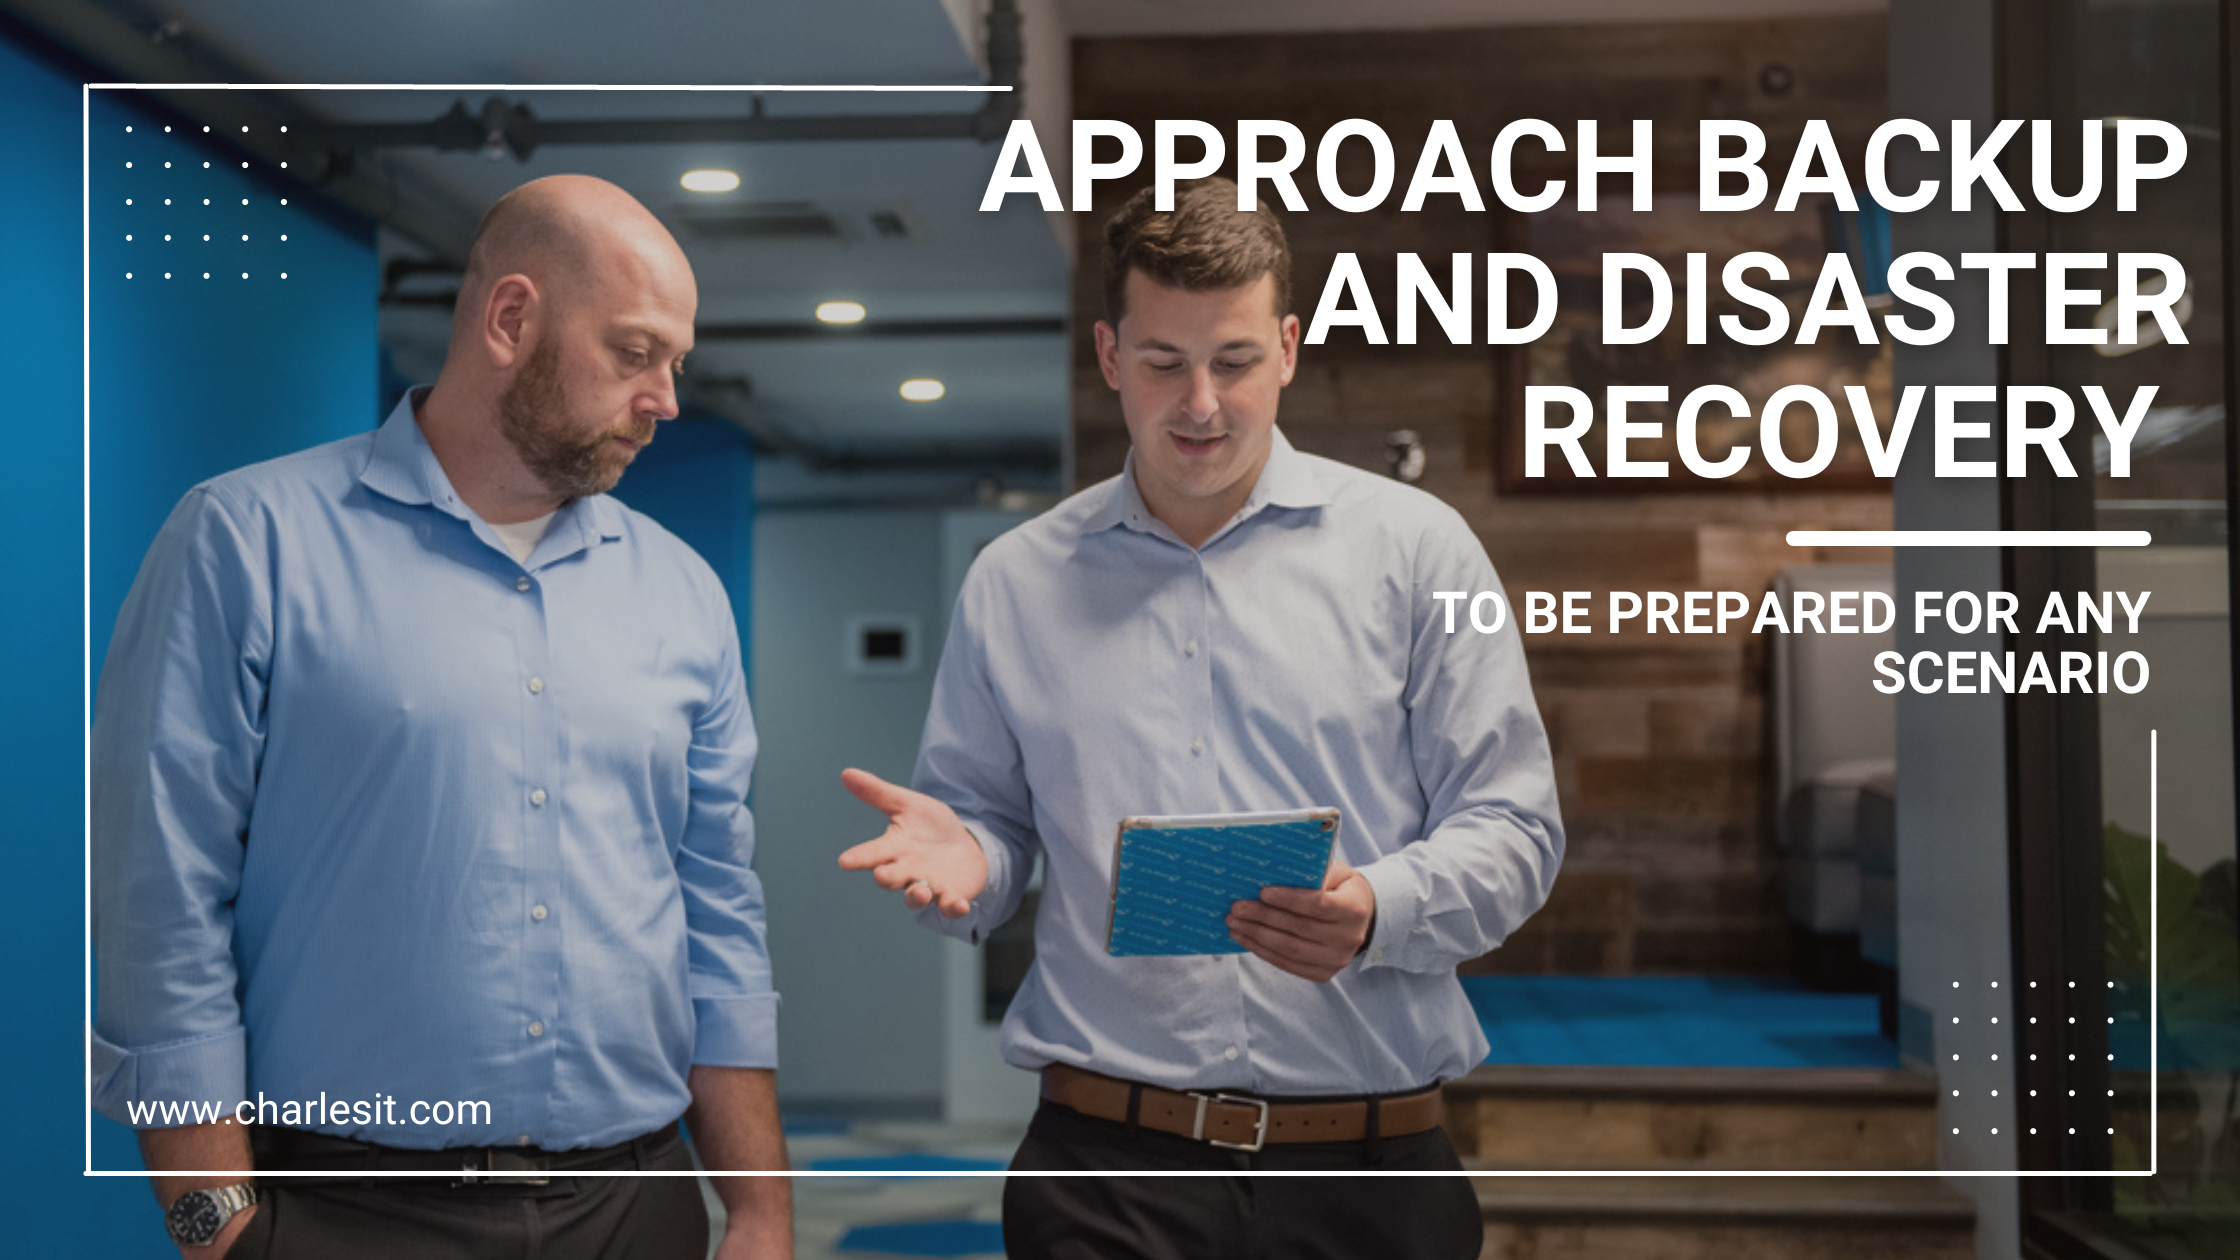 Change How You Approach Backup and Disaster Recovery to Be Prepared for Any Scenario